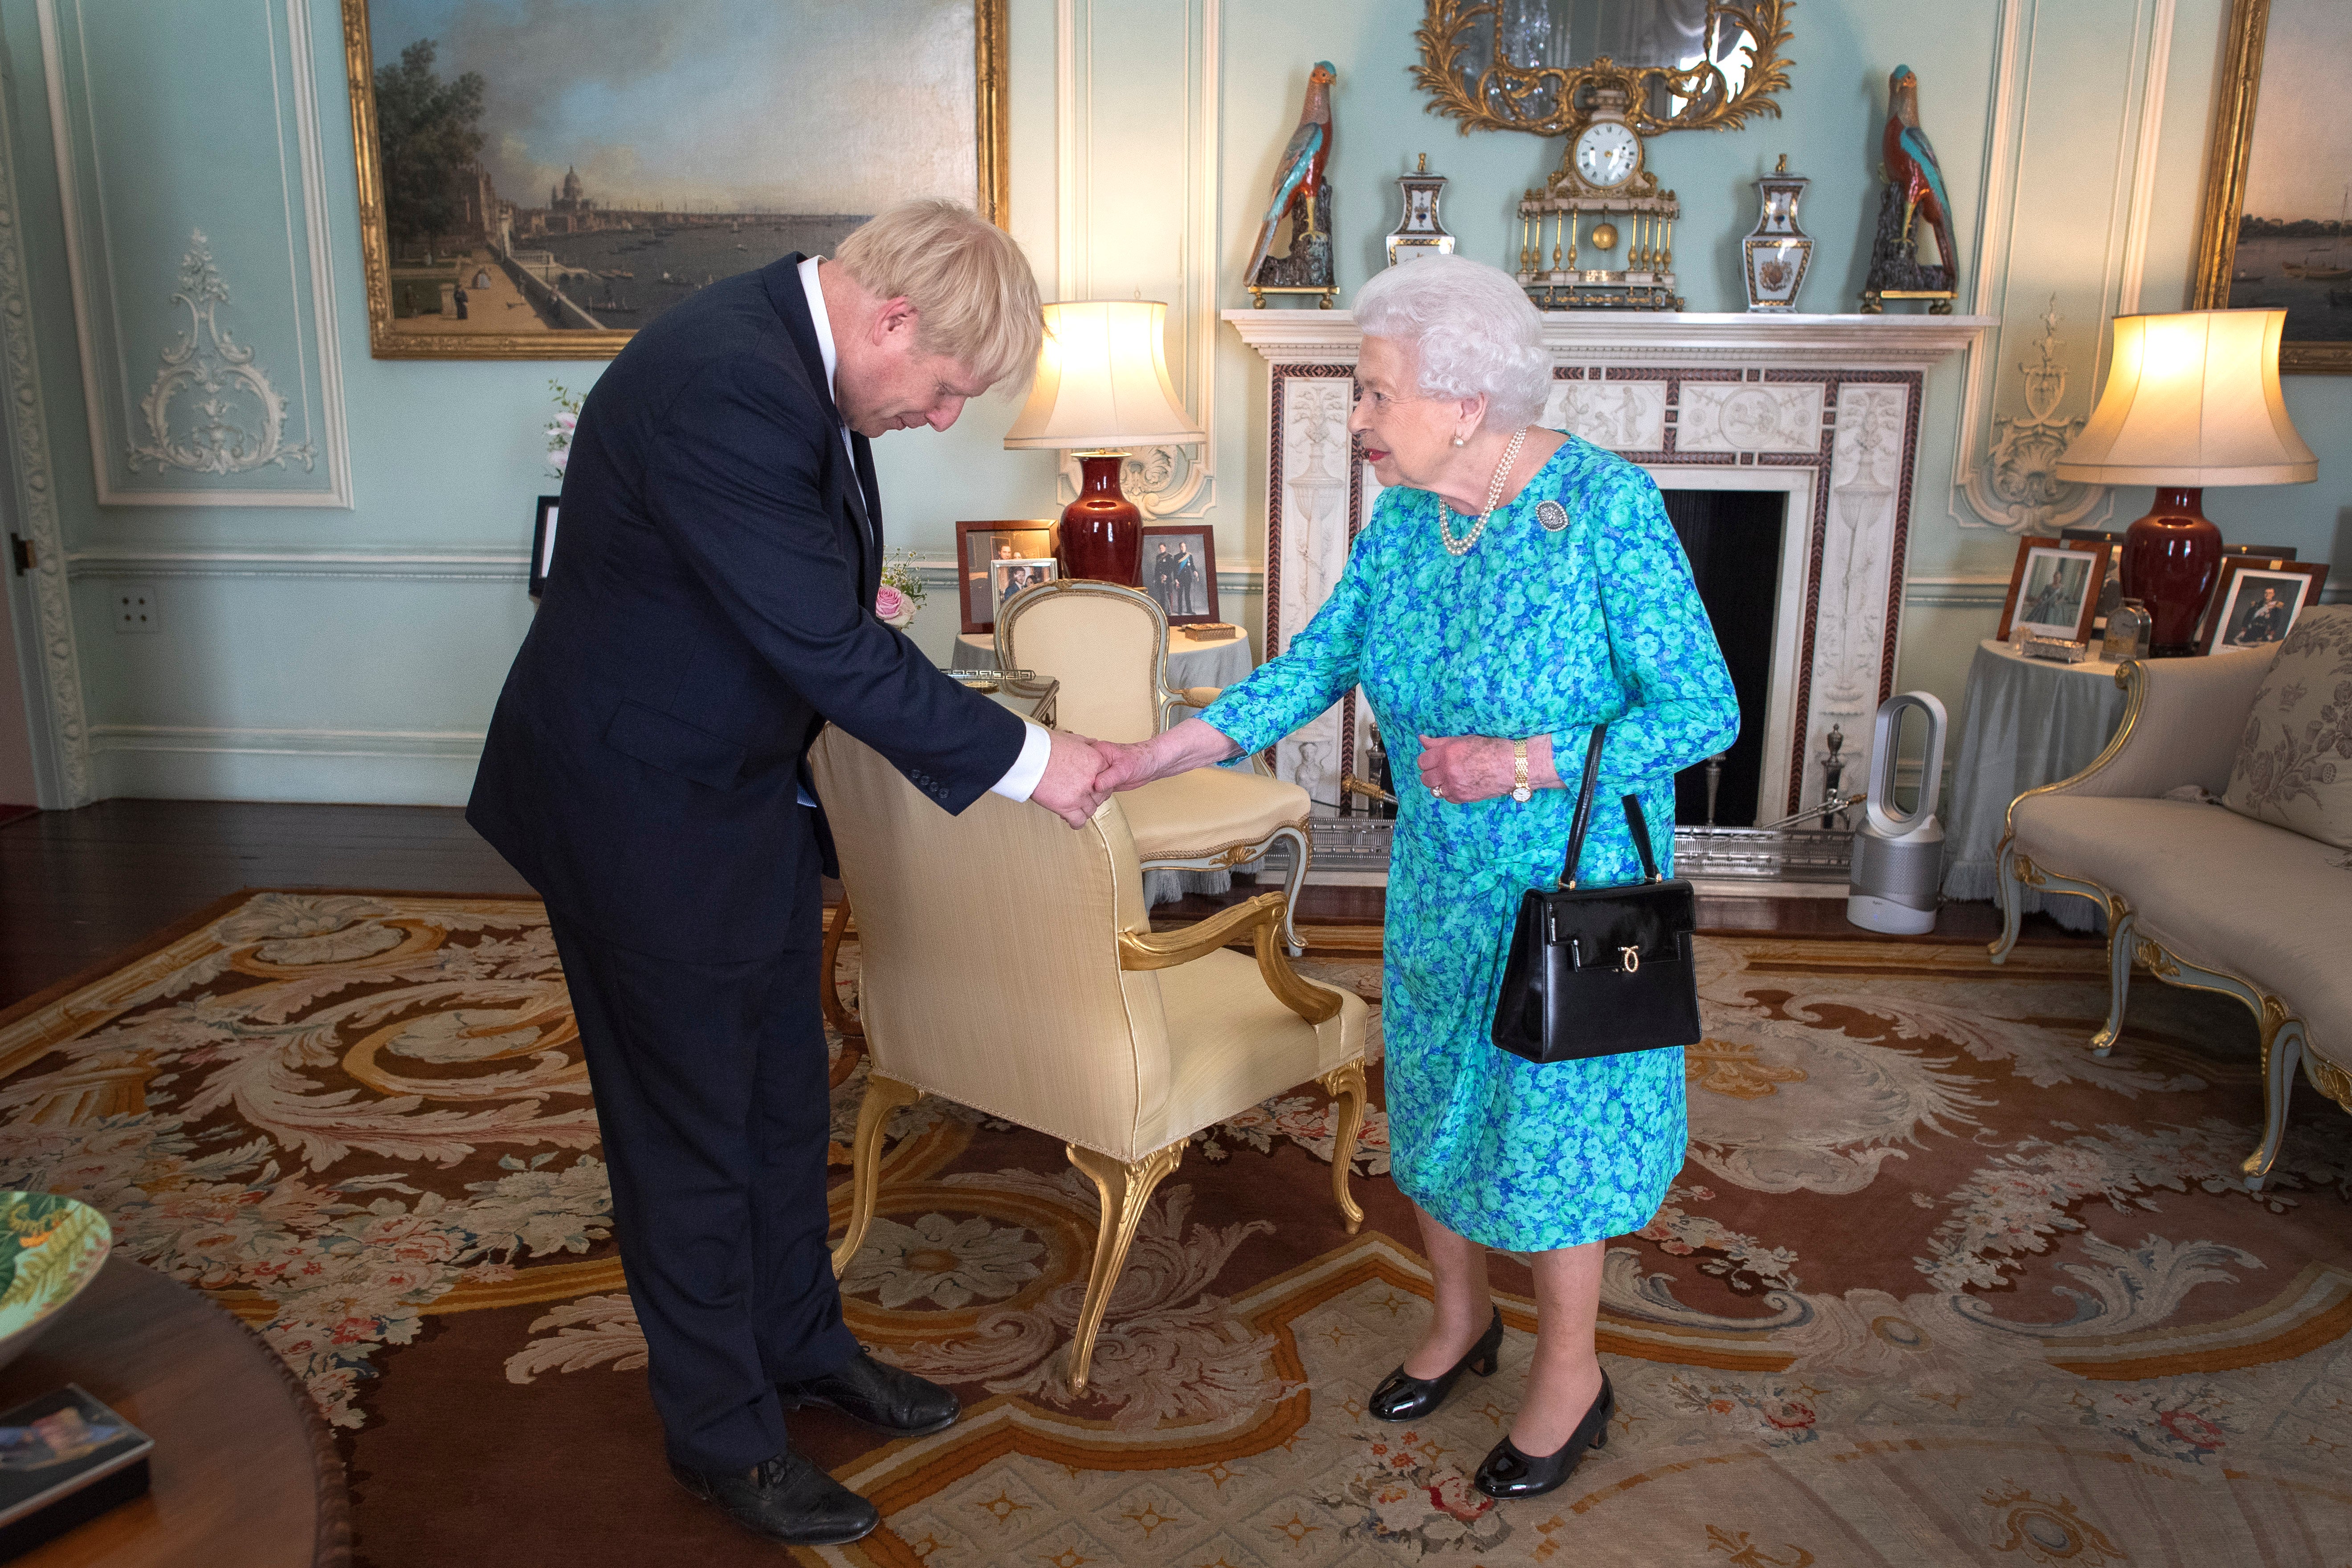 The Queen shakes hands with her 14th prime minister, Boris Johnson